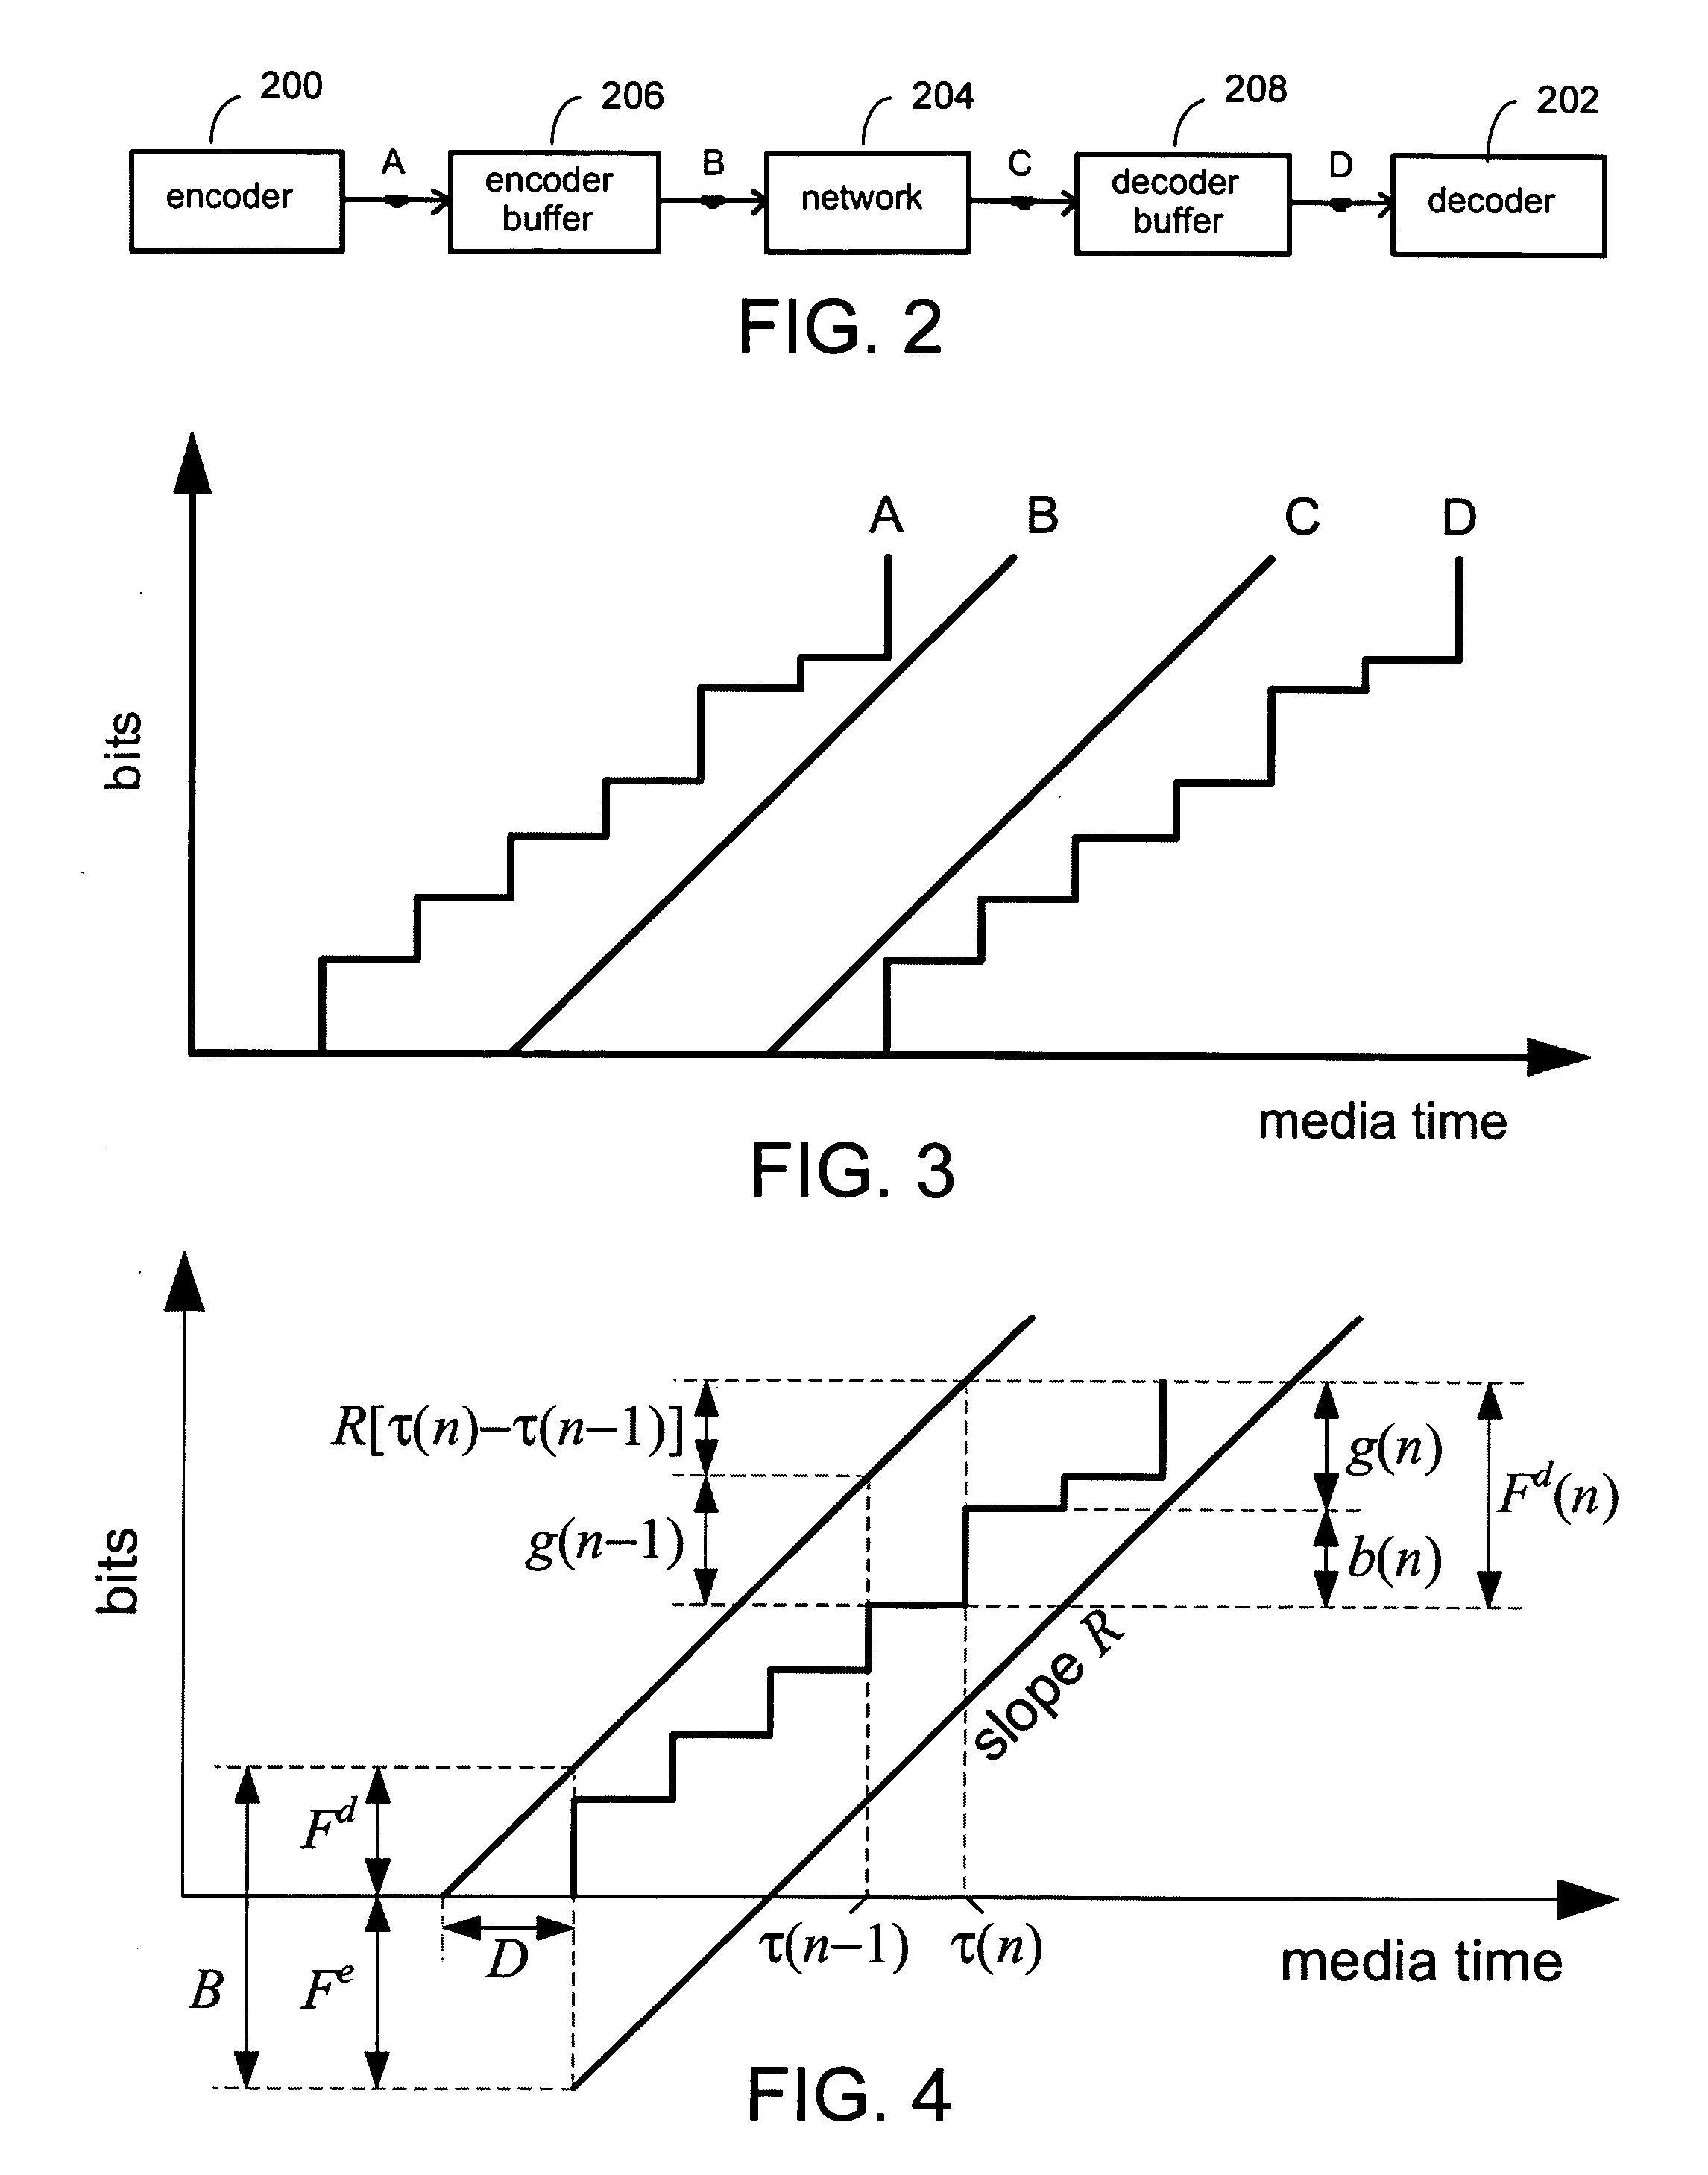 System and process for performing an exponentially weighted moving average on streaming data to establish a moving average bit rate